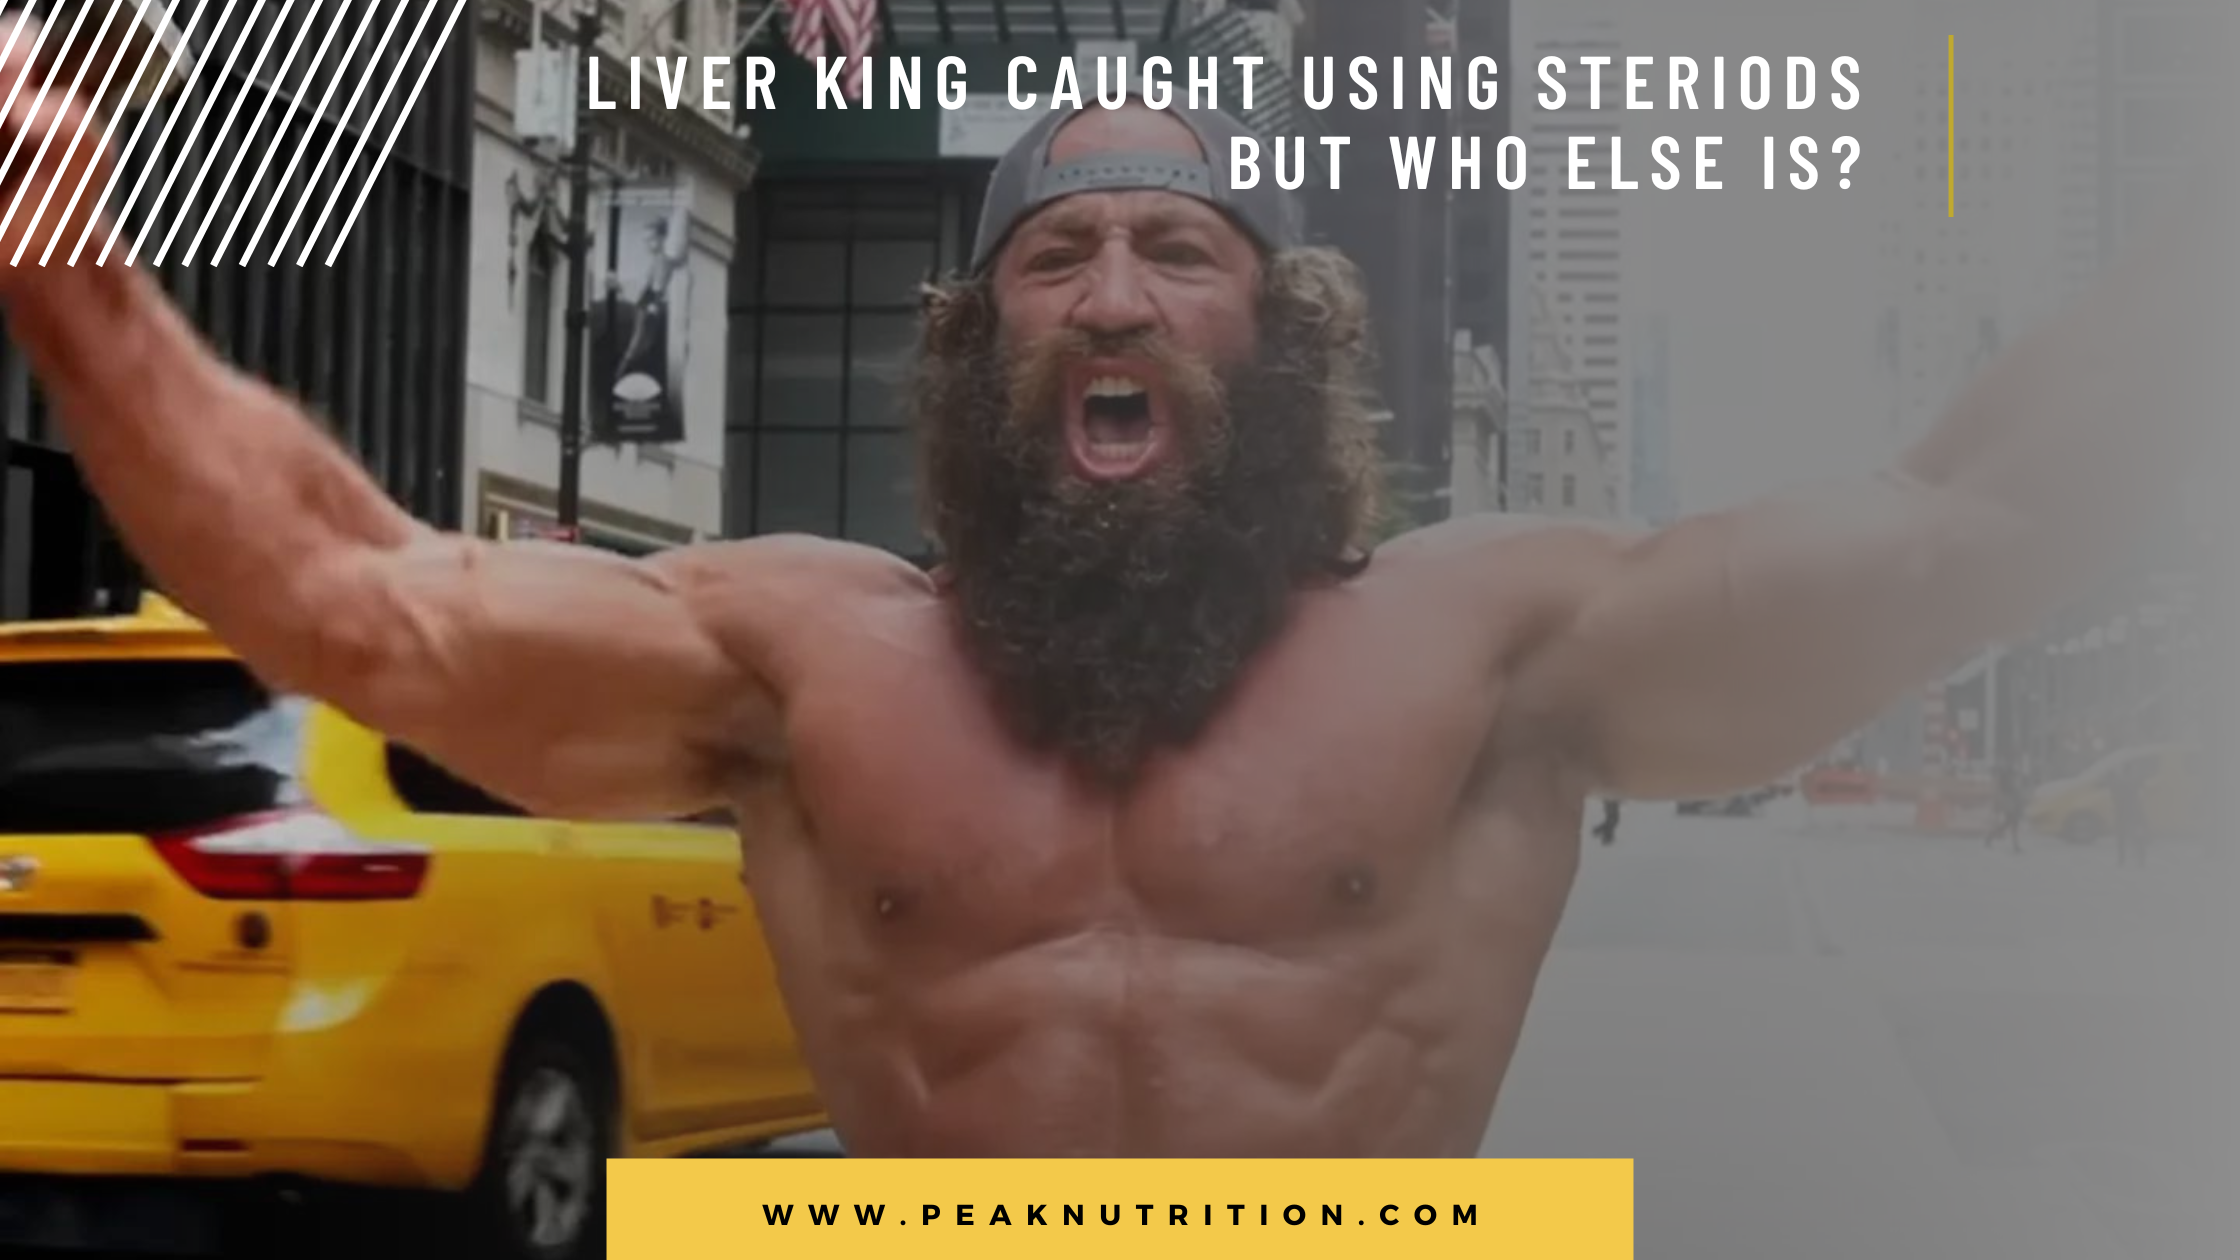 Liver King Caught Using Steroids